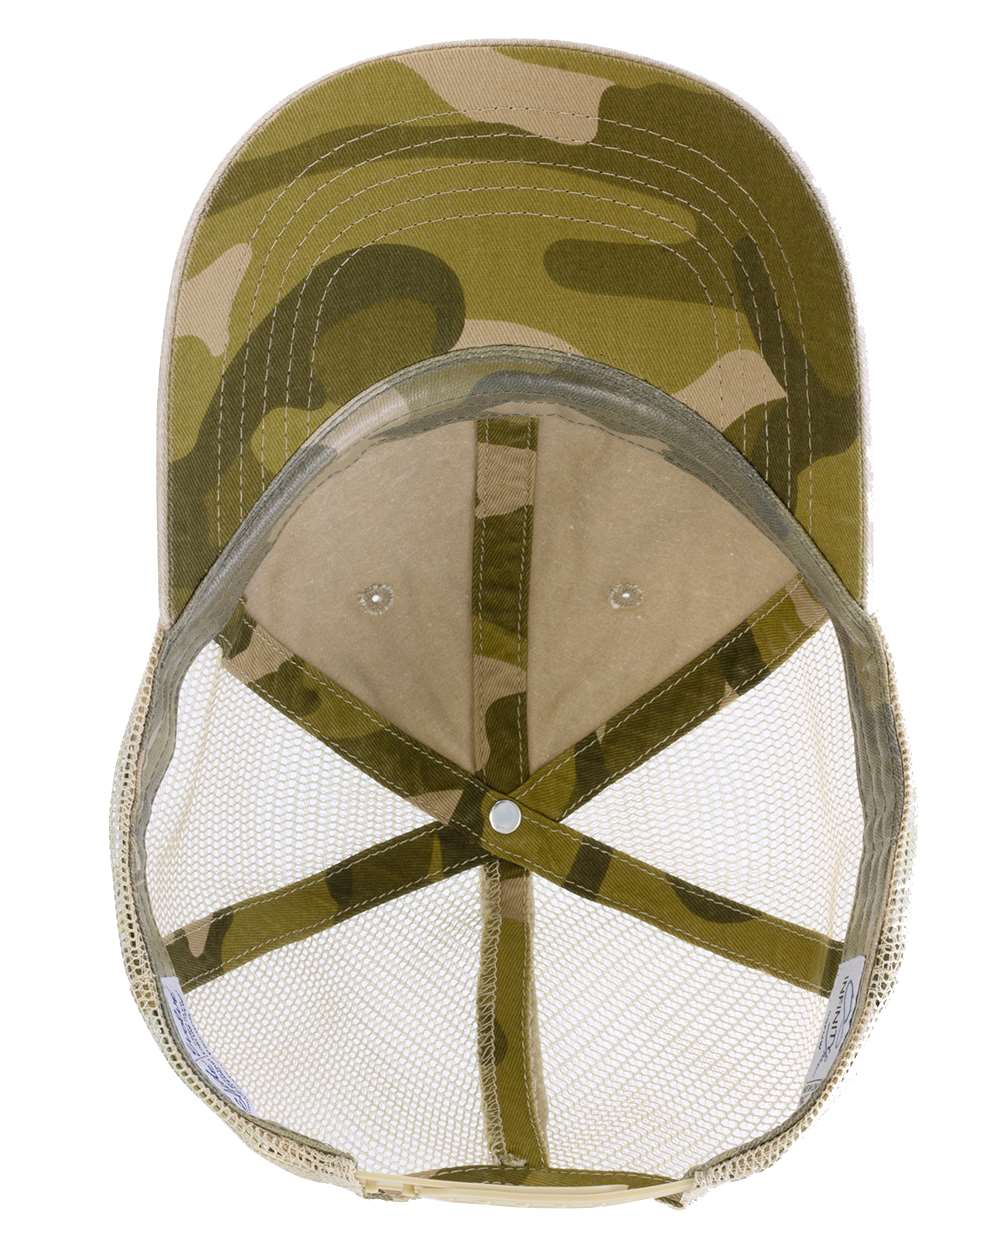 A women's washed mesh-back cap in khaki with camouflage pattern on the front panel.